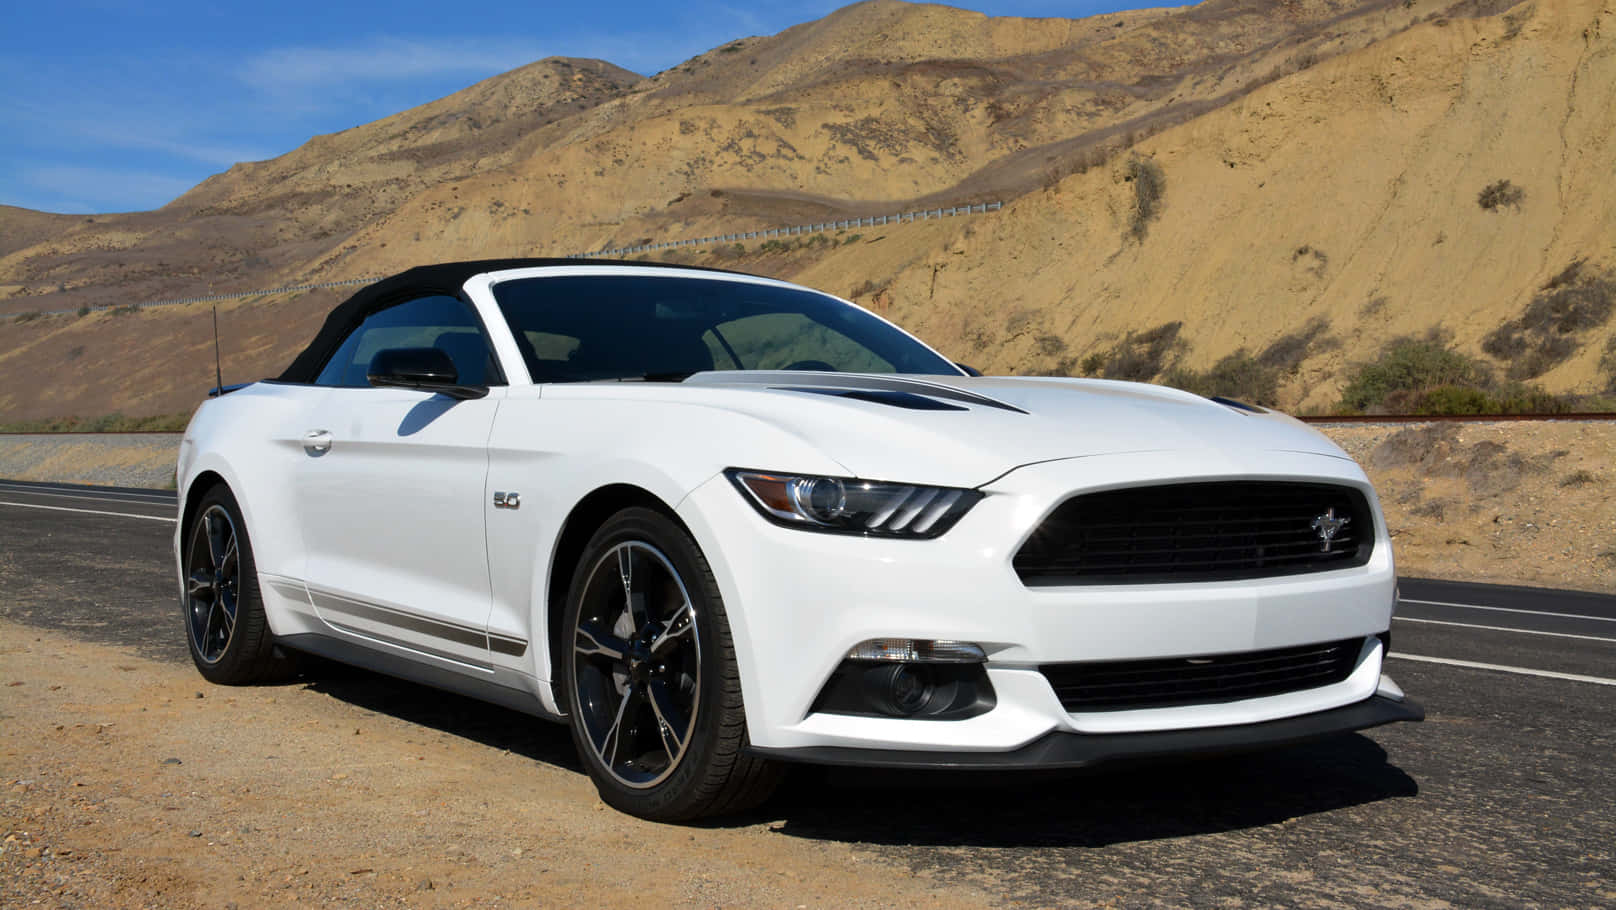 Stunning Ford Mustang California Special on Display Wallpaper